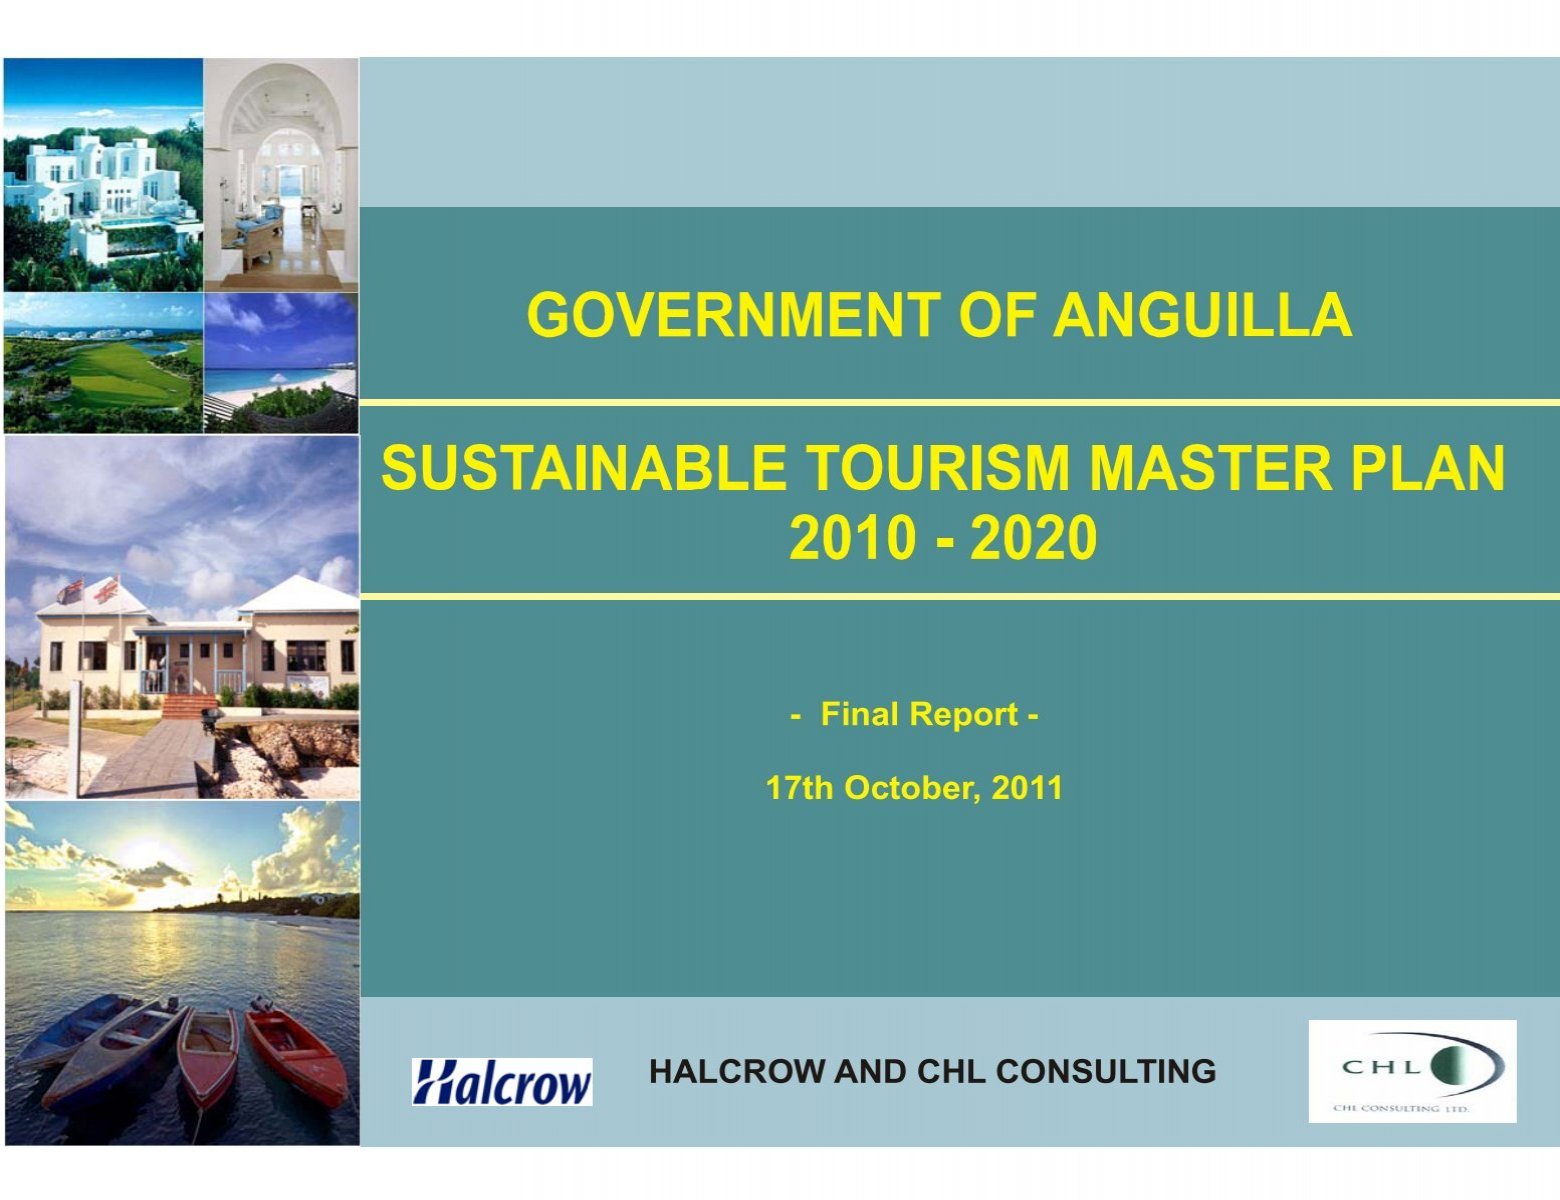 Final Sustainable Tourism Master Plan 2010-2020 - Government of